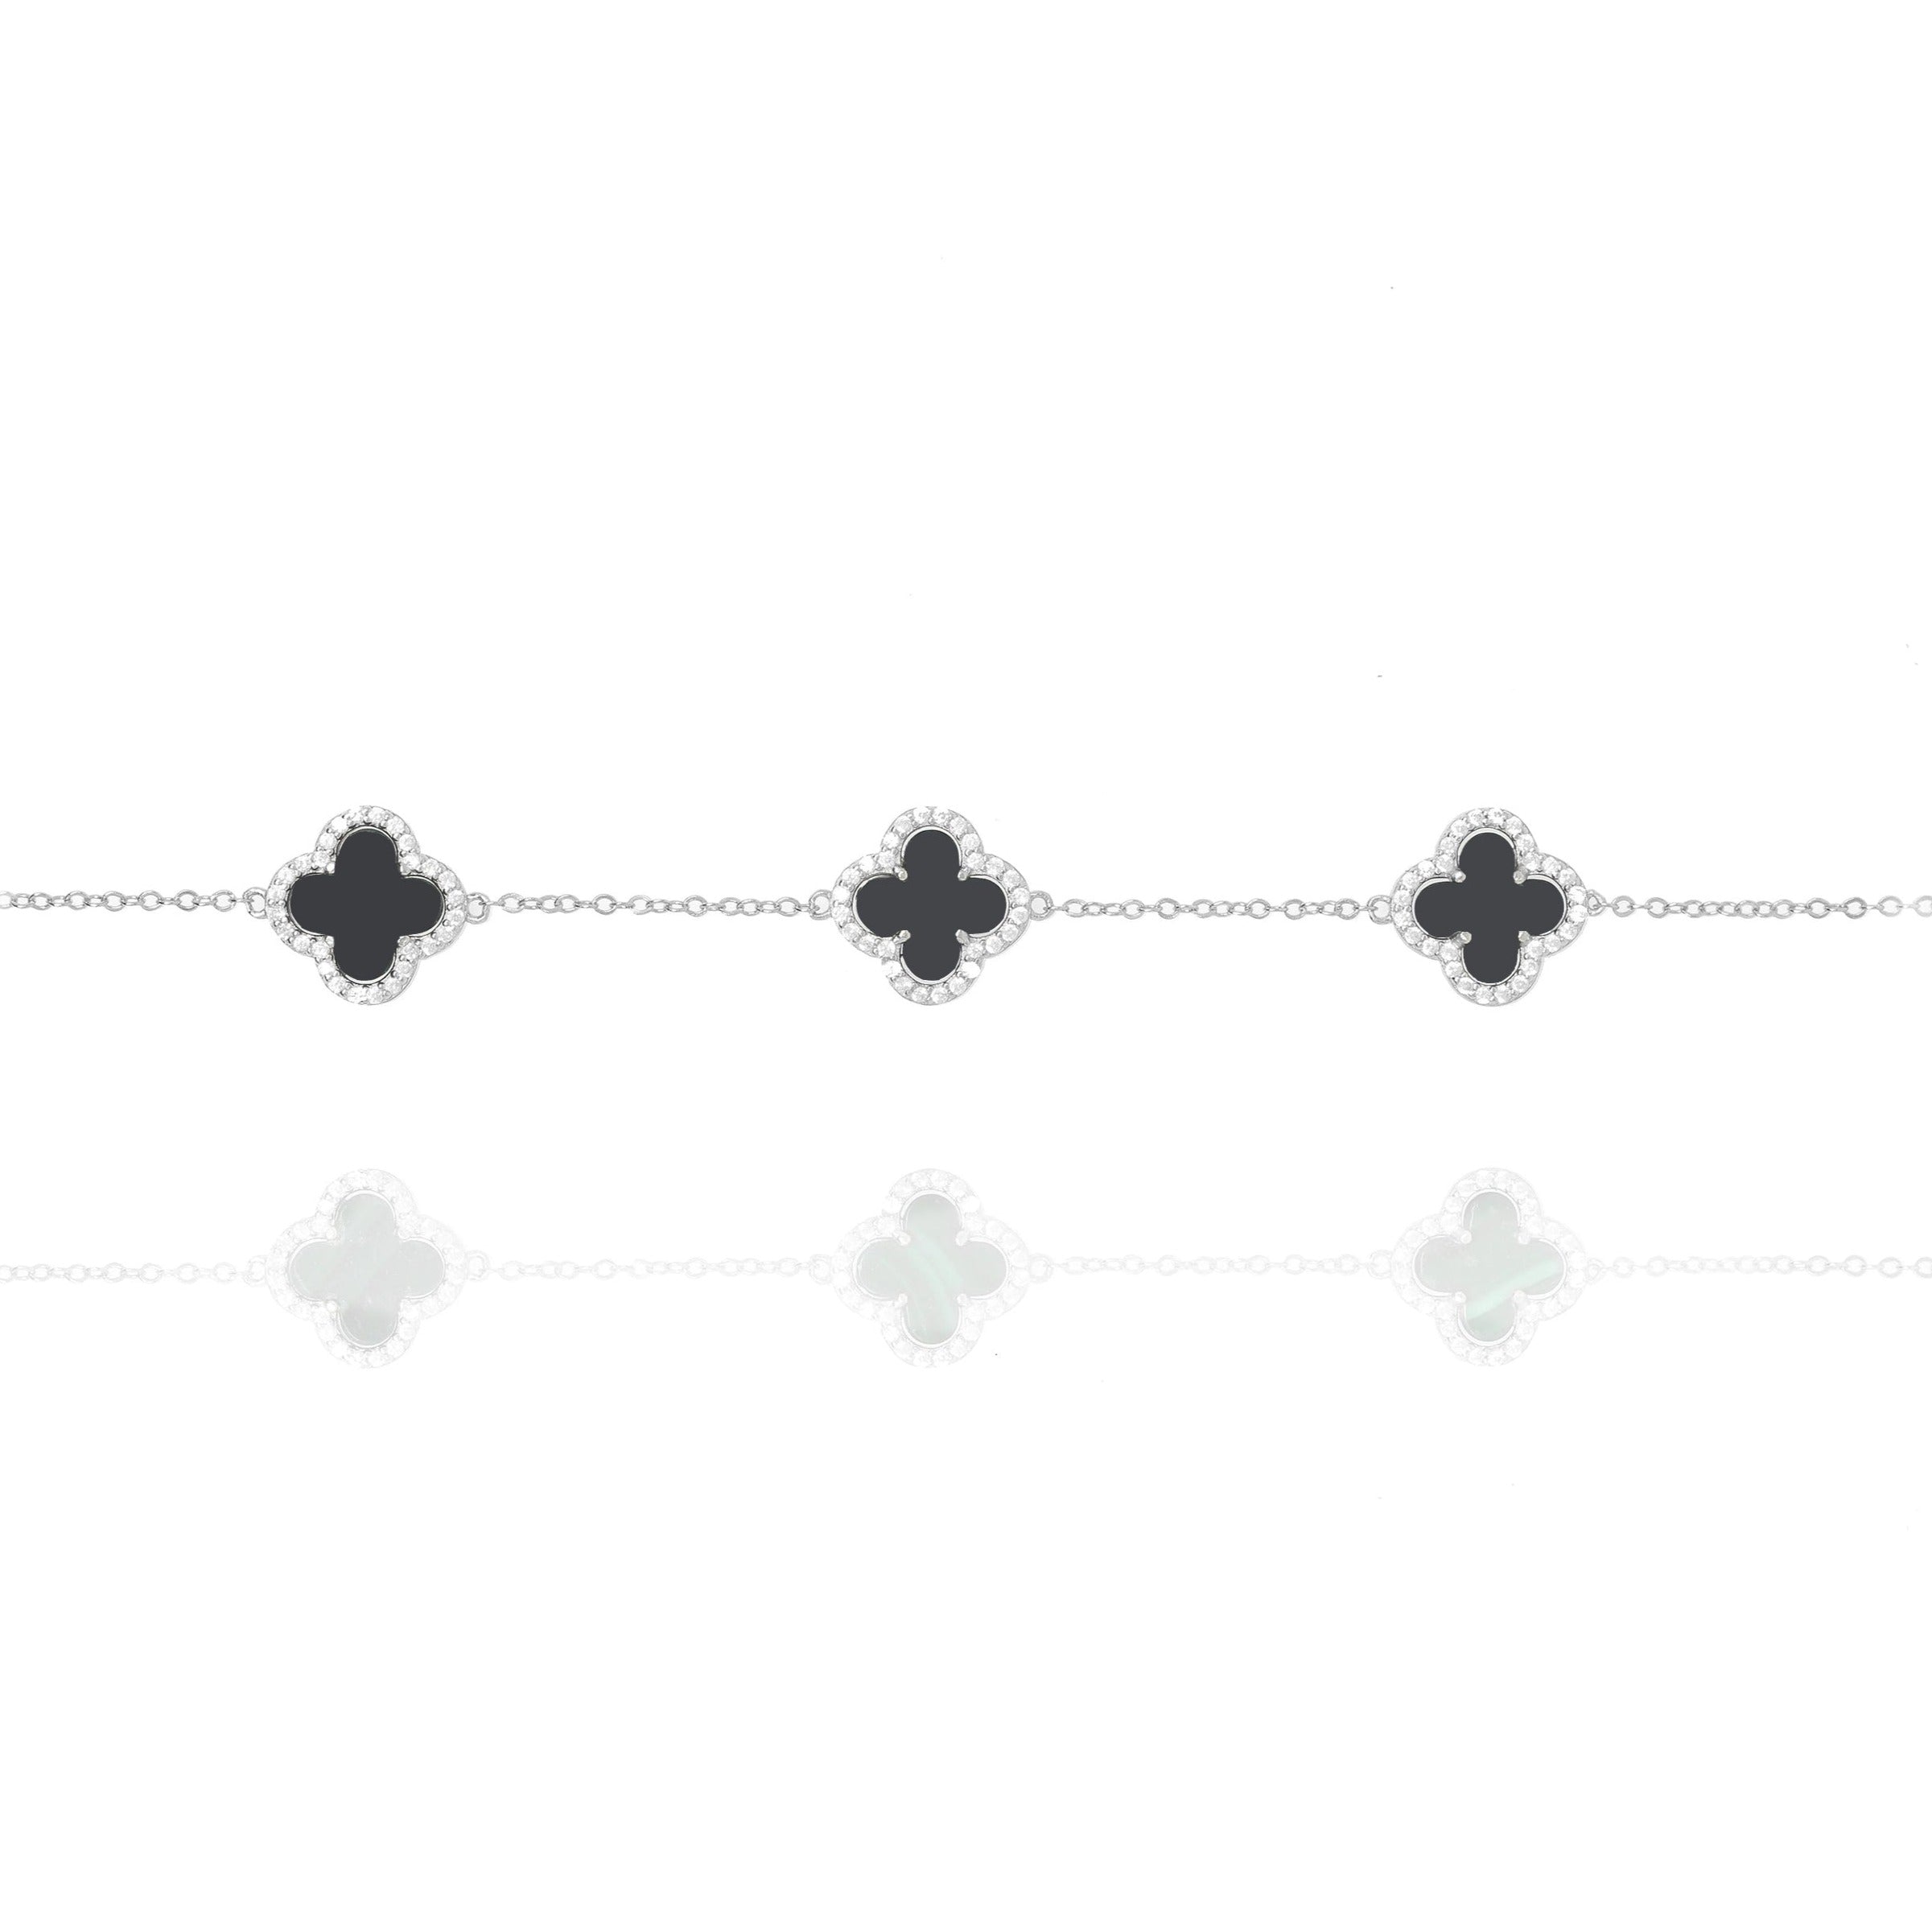 Clover Chain Bracelet with Black Onyx and Cubic Zirconia (Silver)